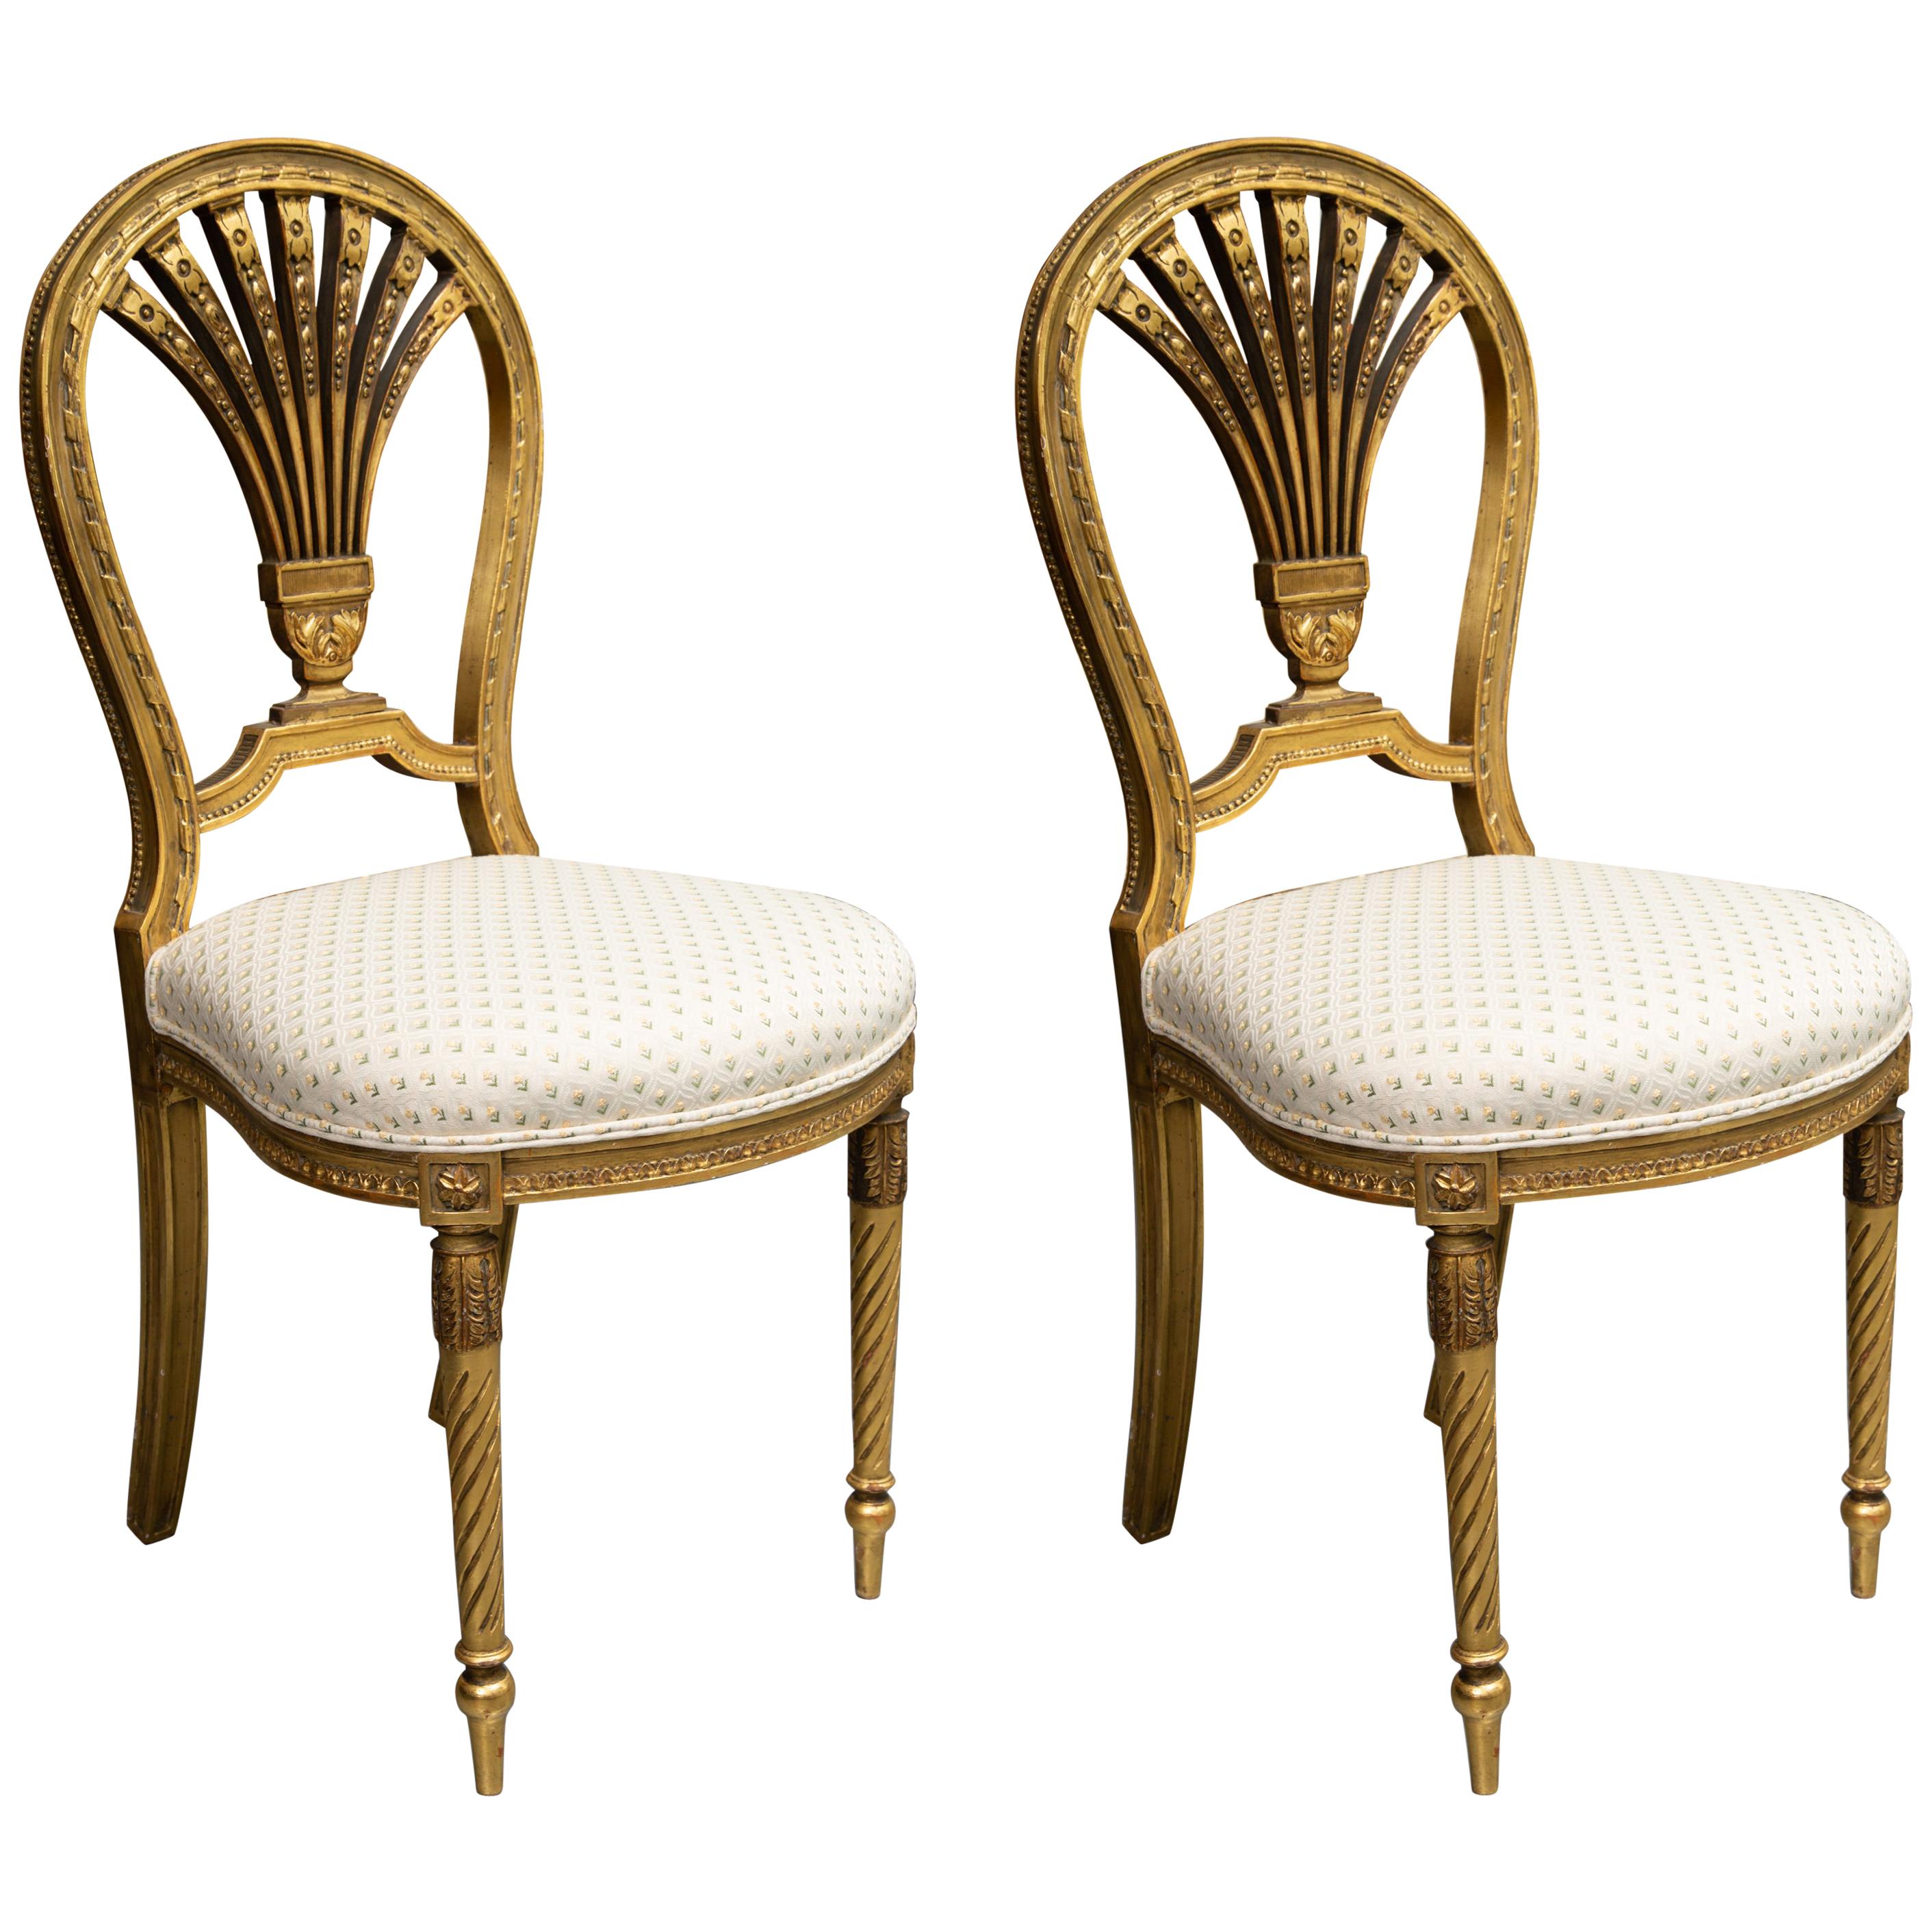 Late 19th Century Pair of Louis XV Style Giltwood Side Chairs